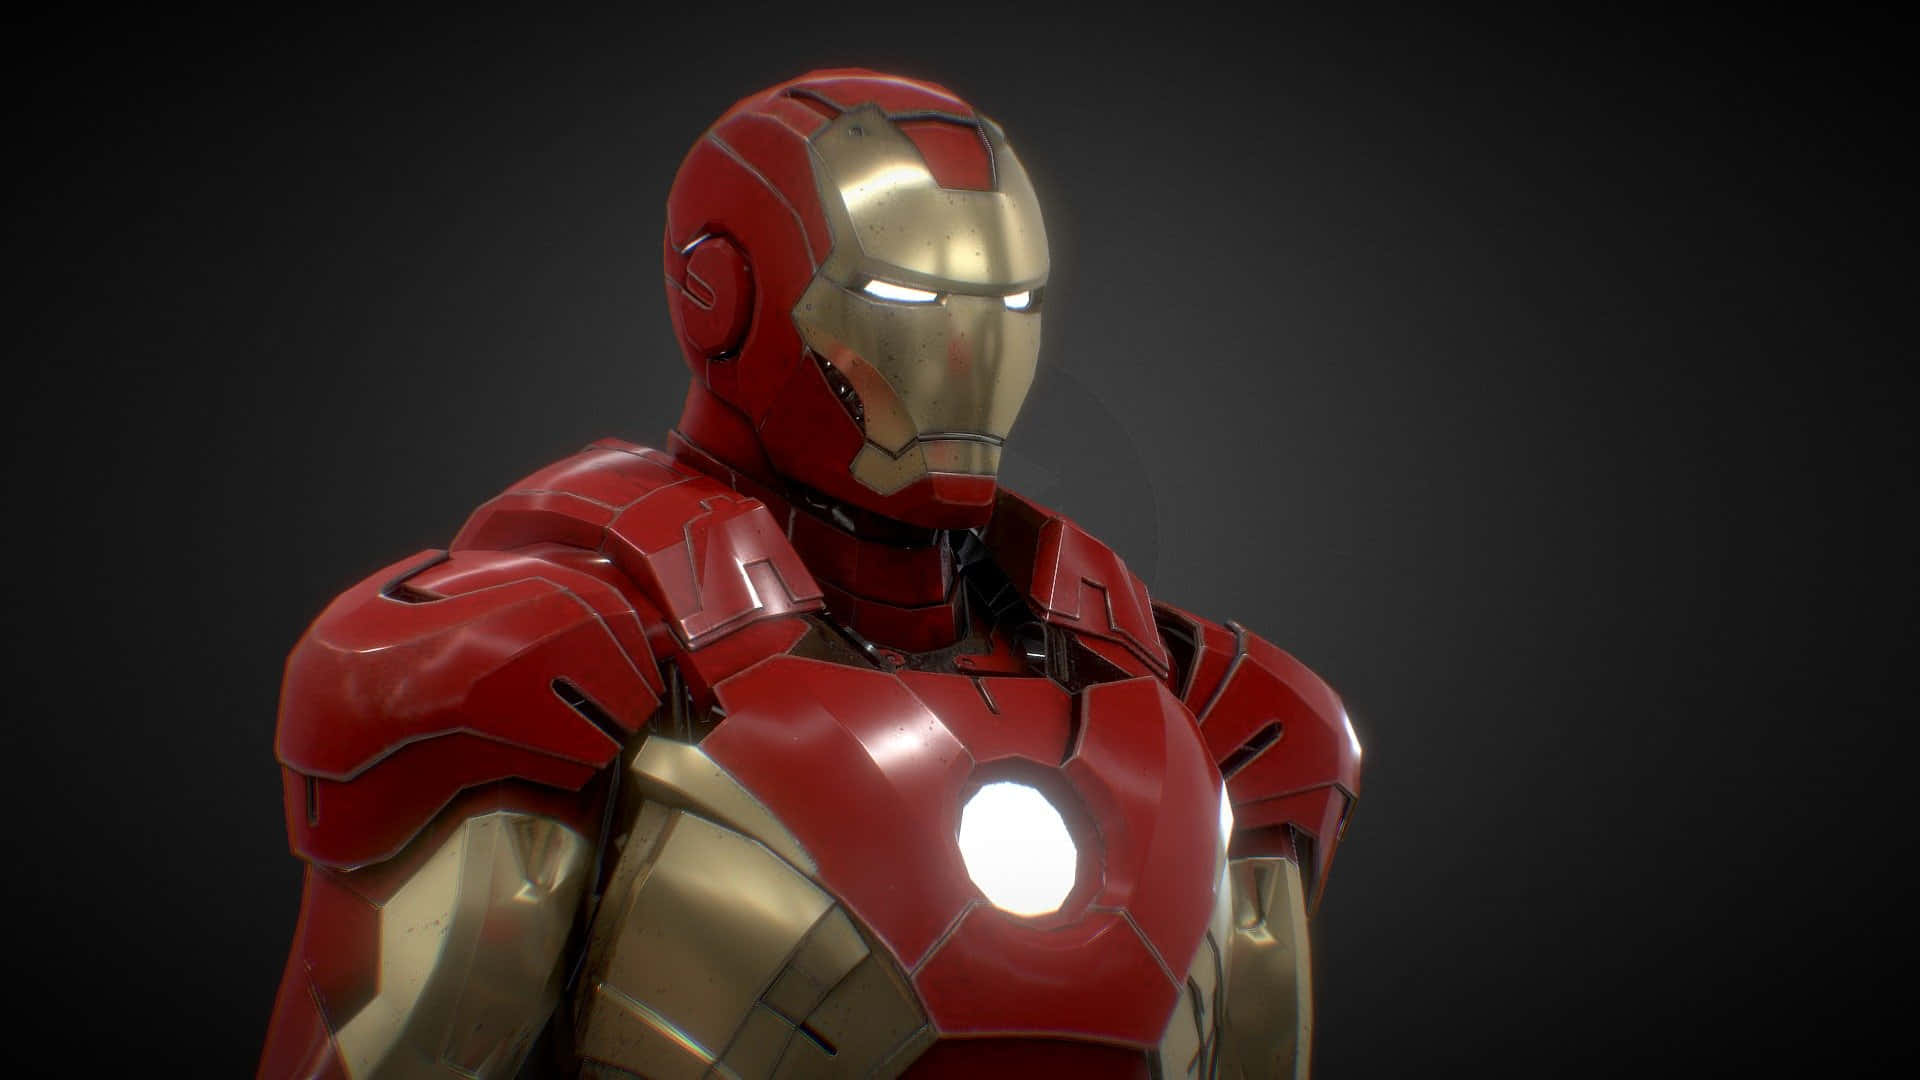 Iron Man Action Figure On Black Picture